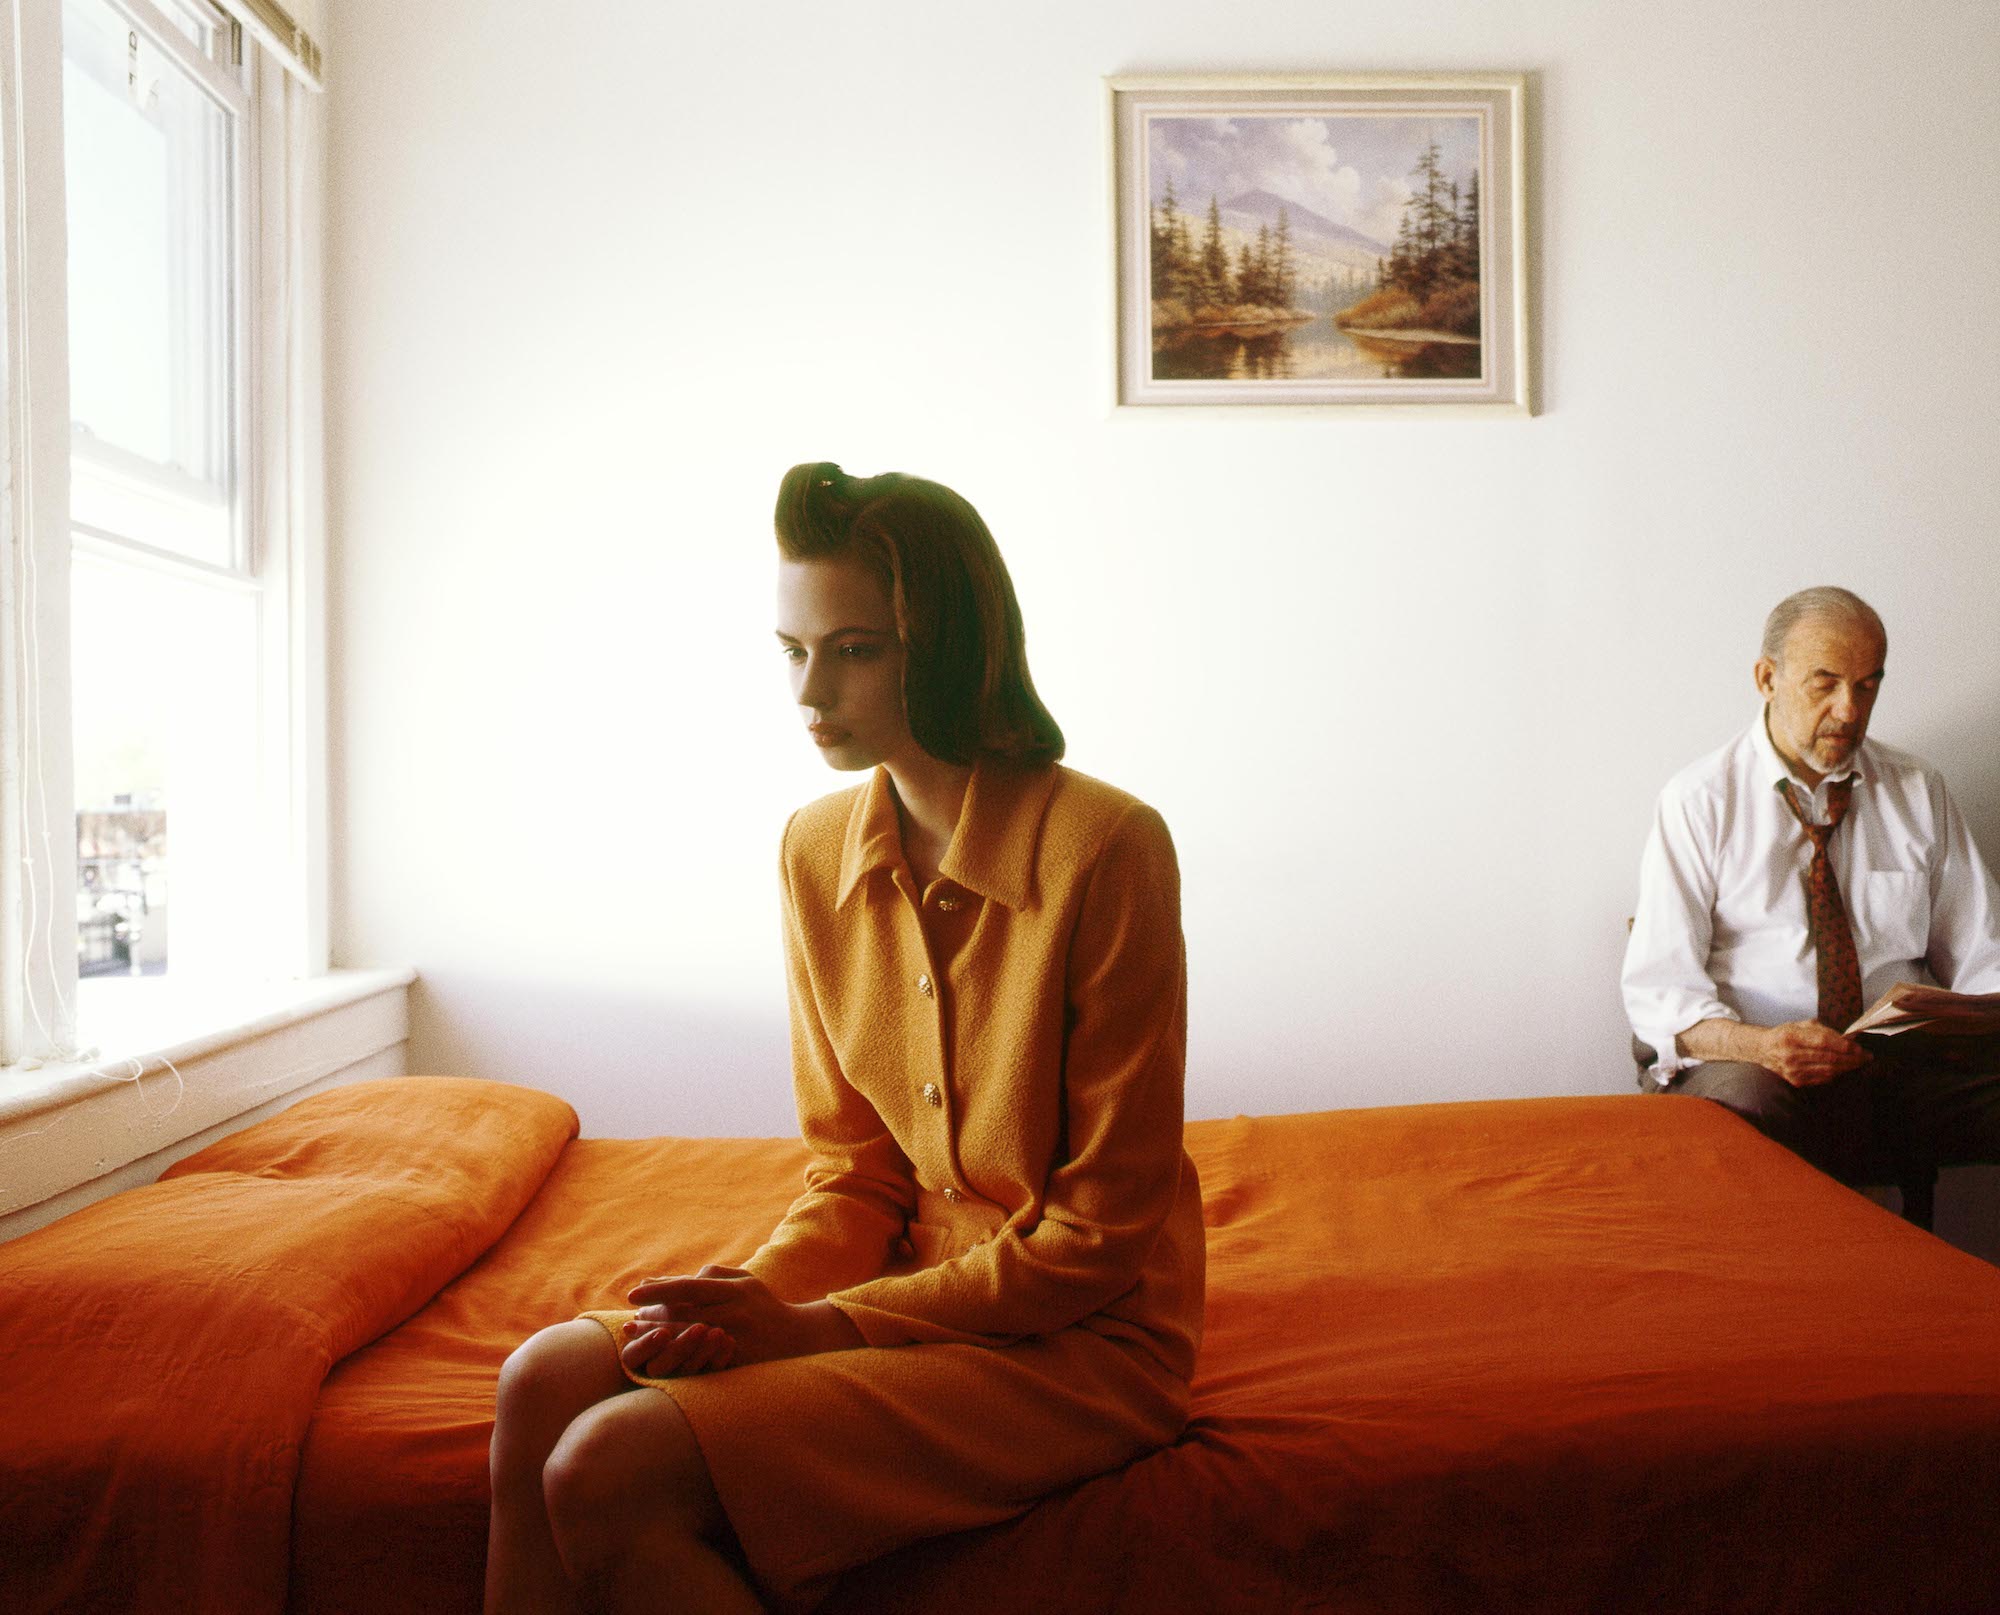 Michael Mundy's favourite image is a shot for a fashion shoot inspired by the work of Edward Hopper